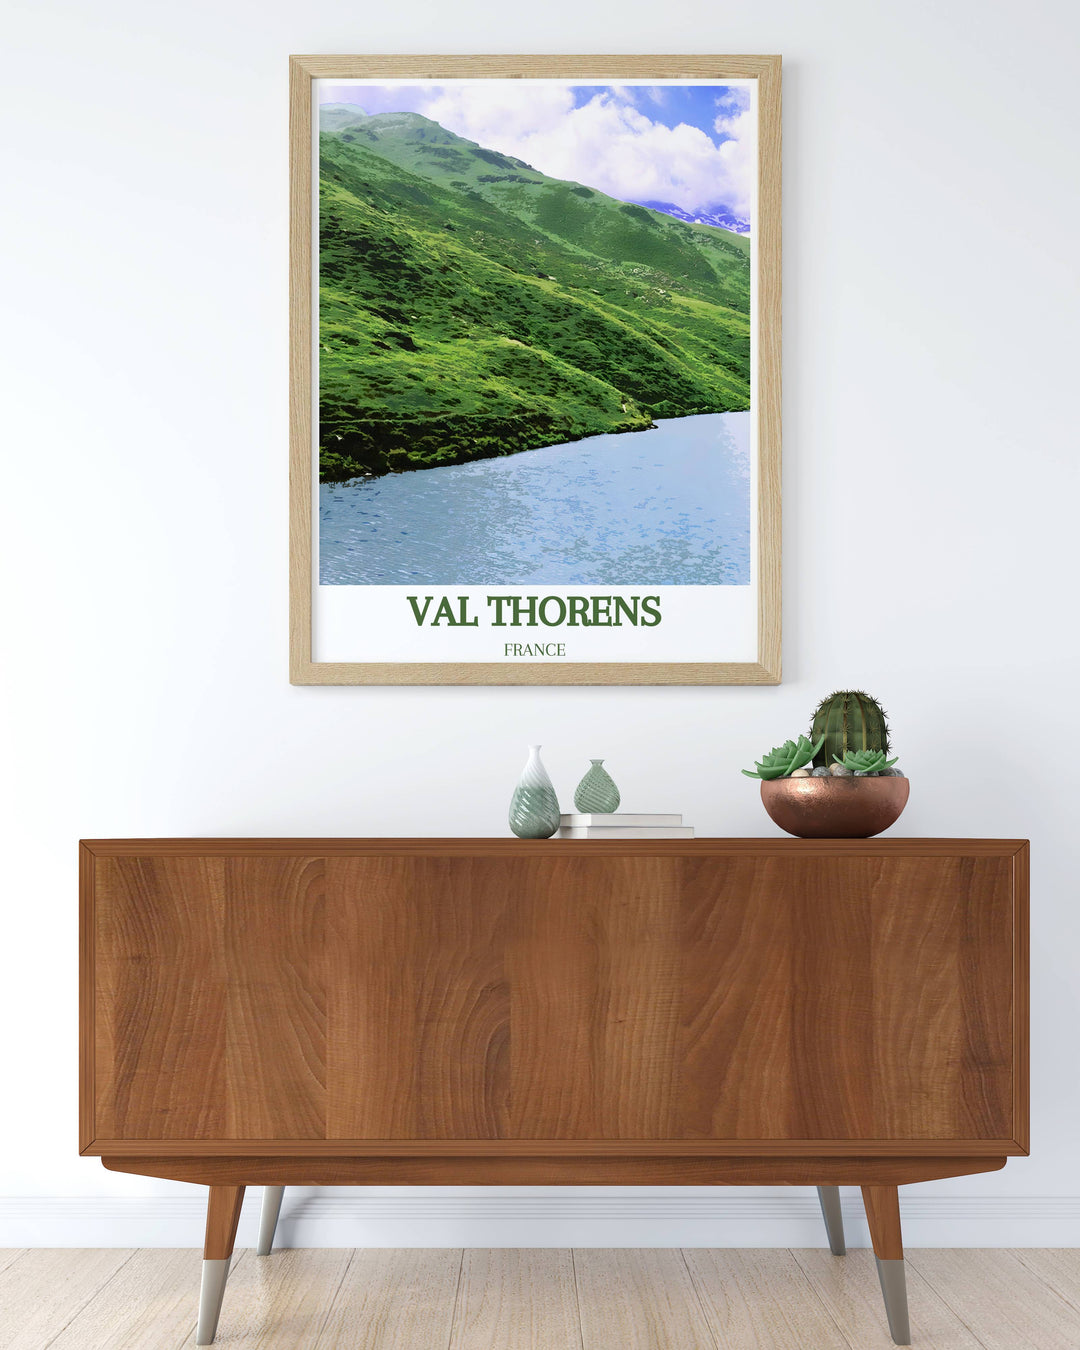 Scenic travel poster of Lac du Lou in Val Thorens, highlighting the serene waters and majestic alpine backdrop. Adds a touch of tranquility and adventure to your wall decor.